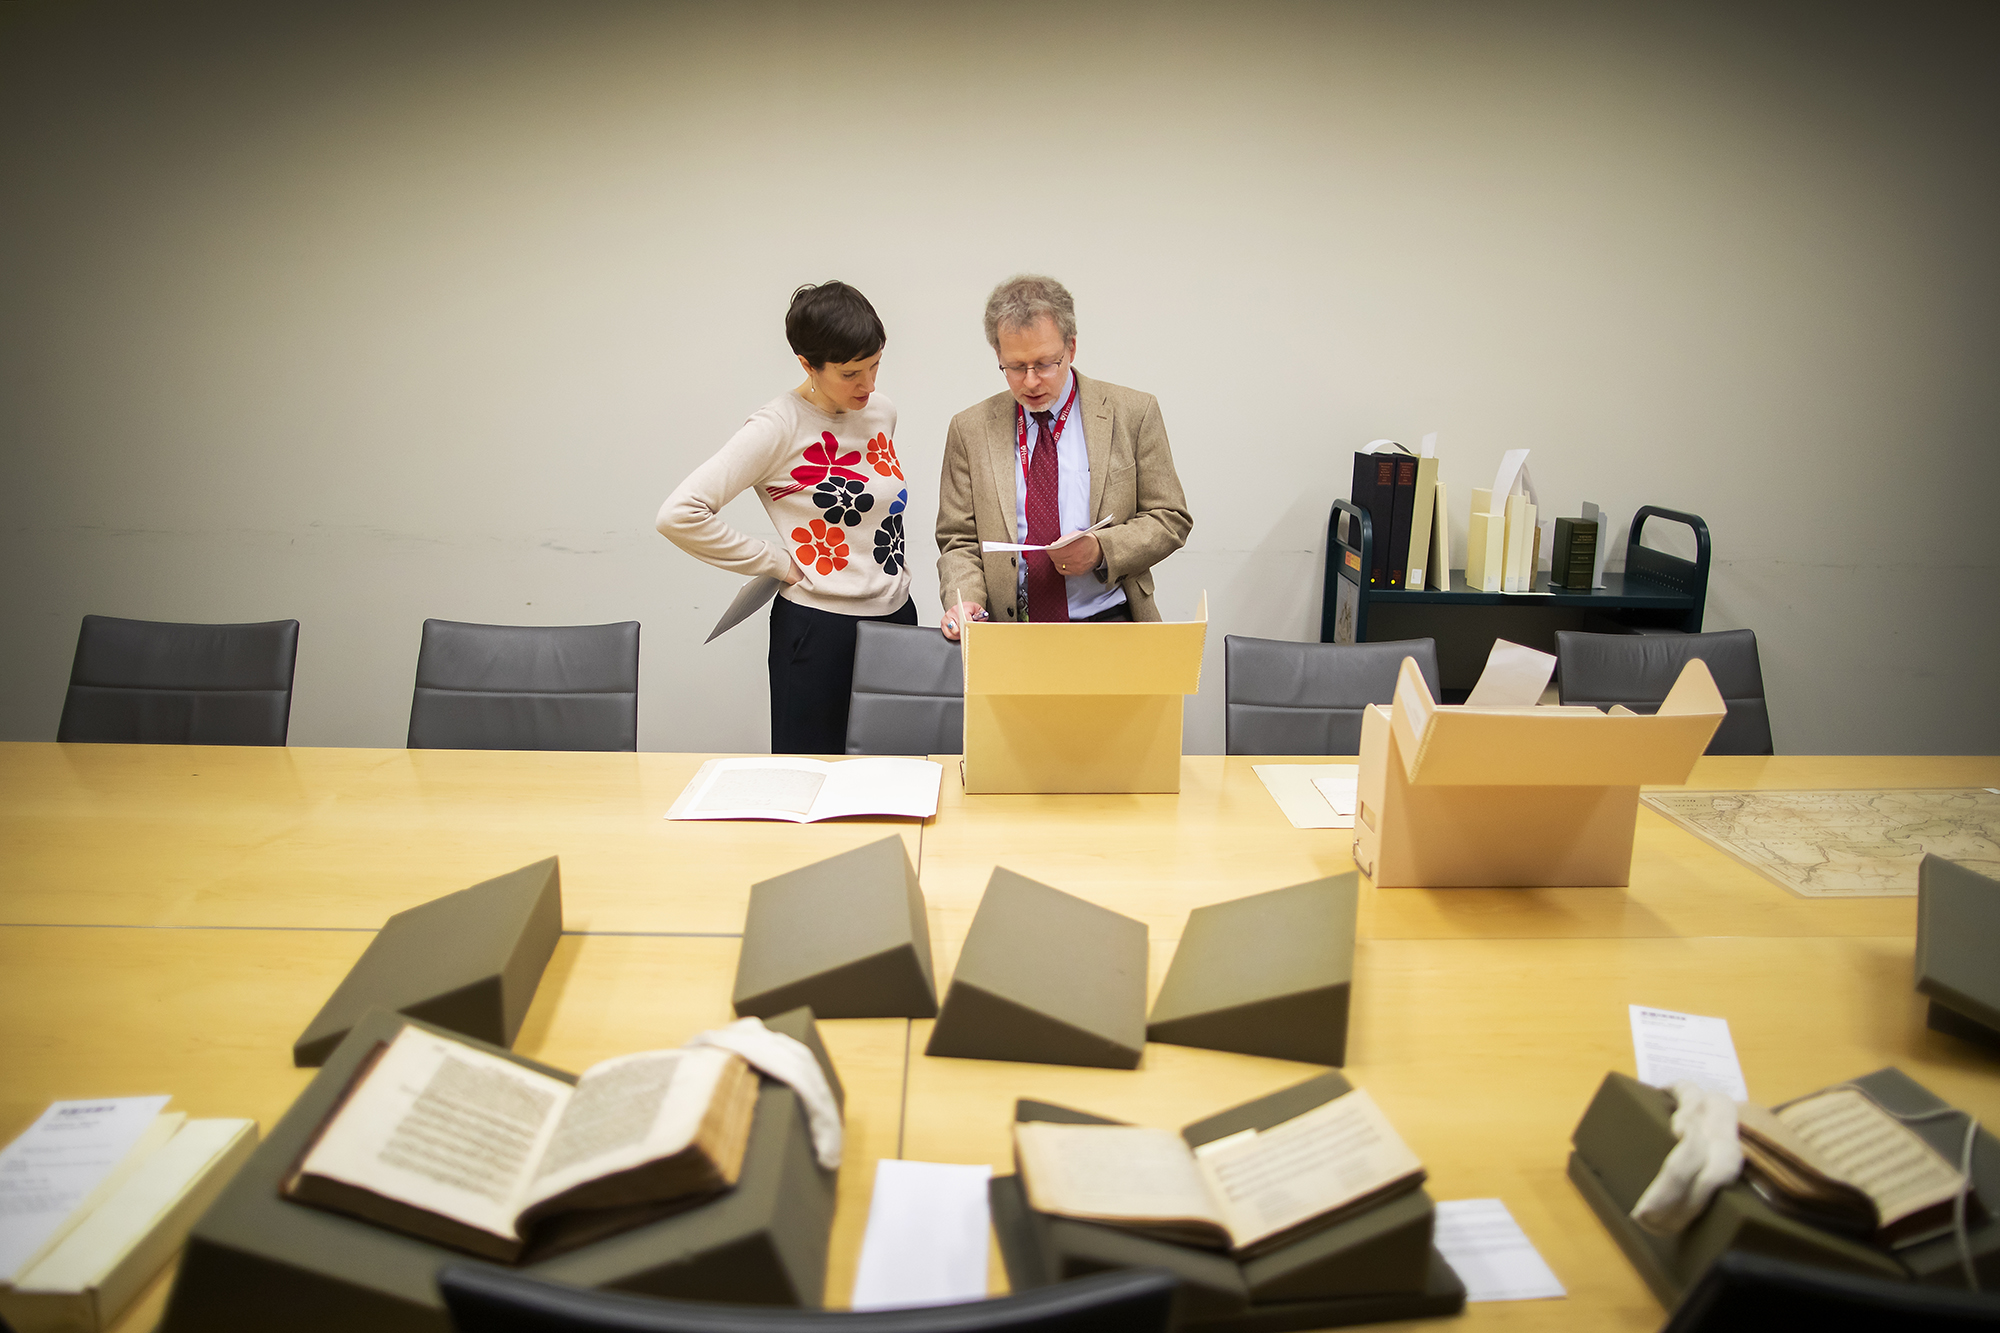 Two people looking at a text with several books laid out on a table in front of them.